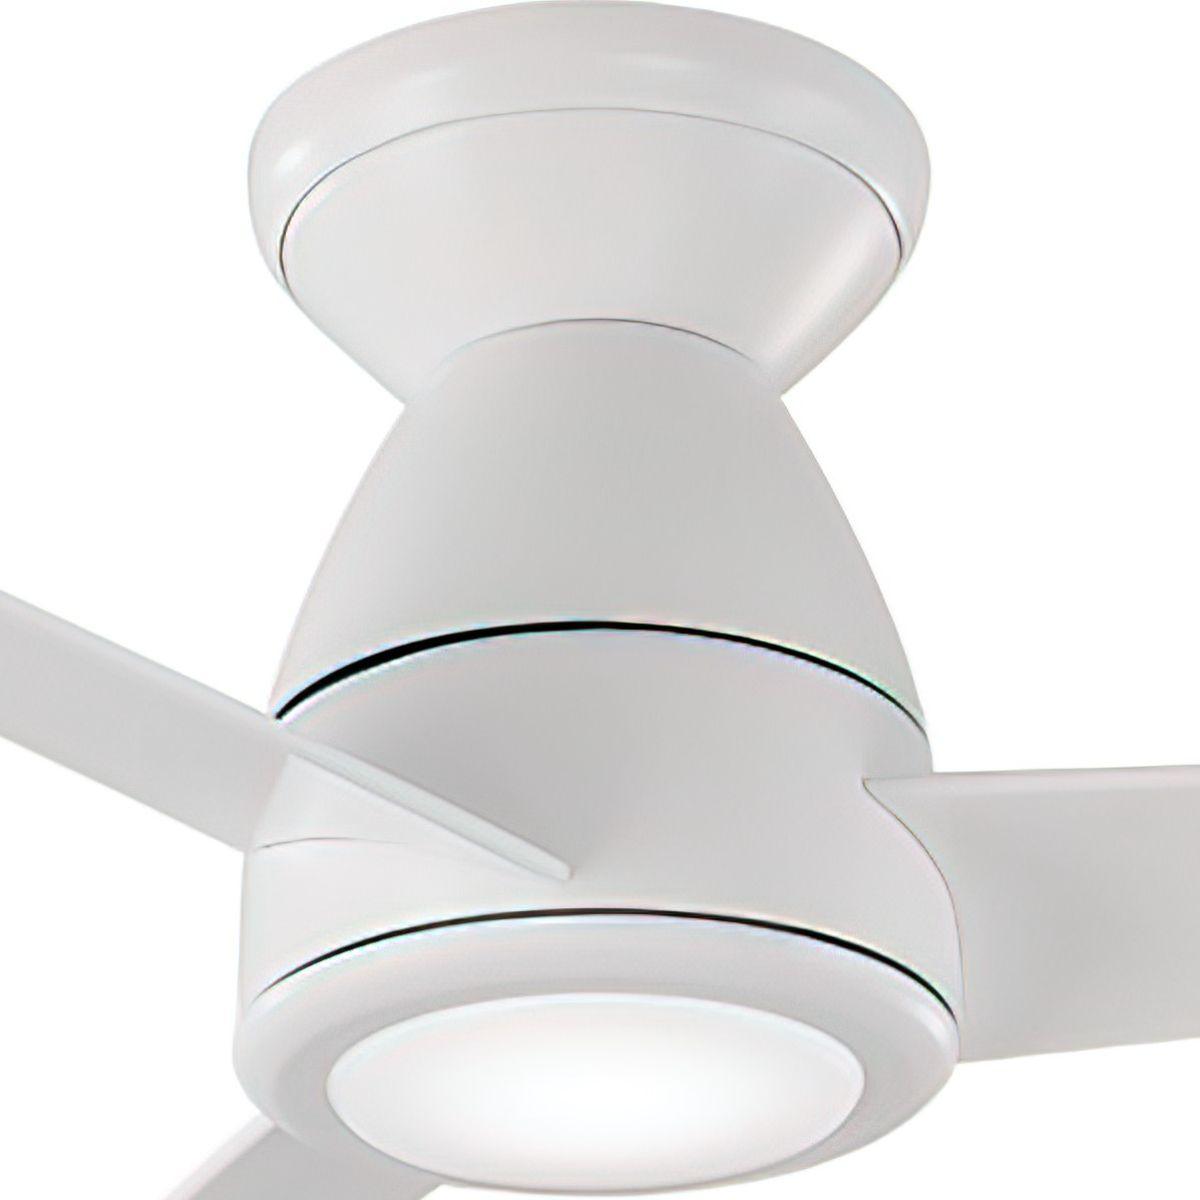 Tip-Top 44 Inch Modern Outdoor Smart Ceiling Fan With 3500K LED And Remote